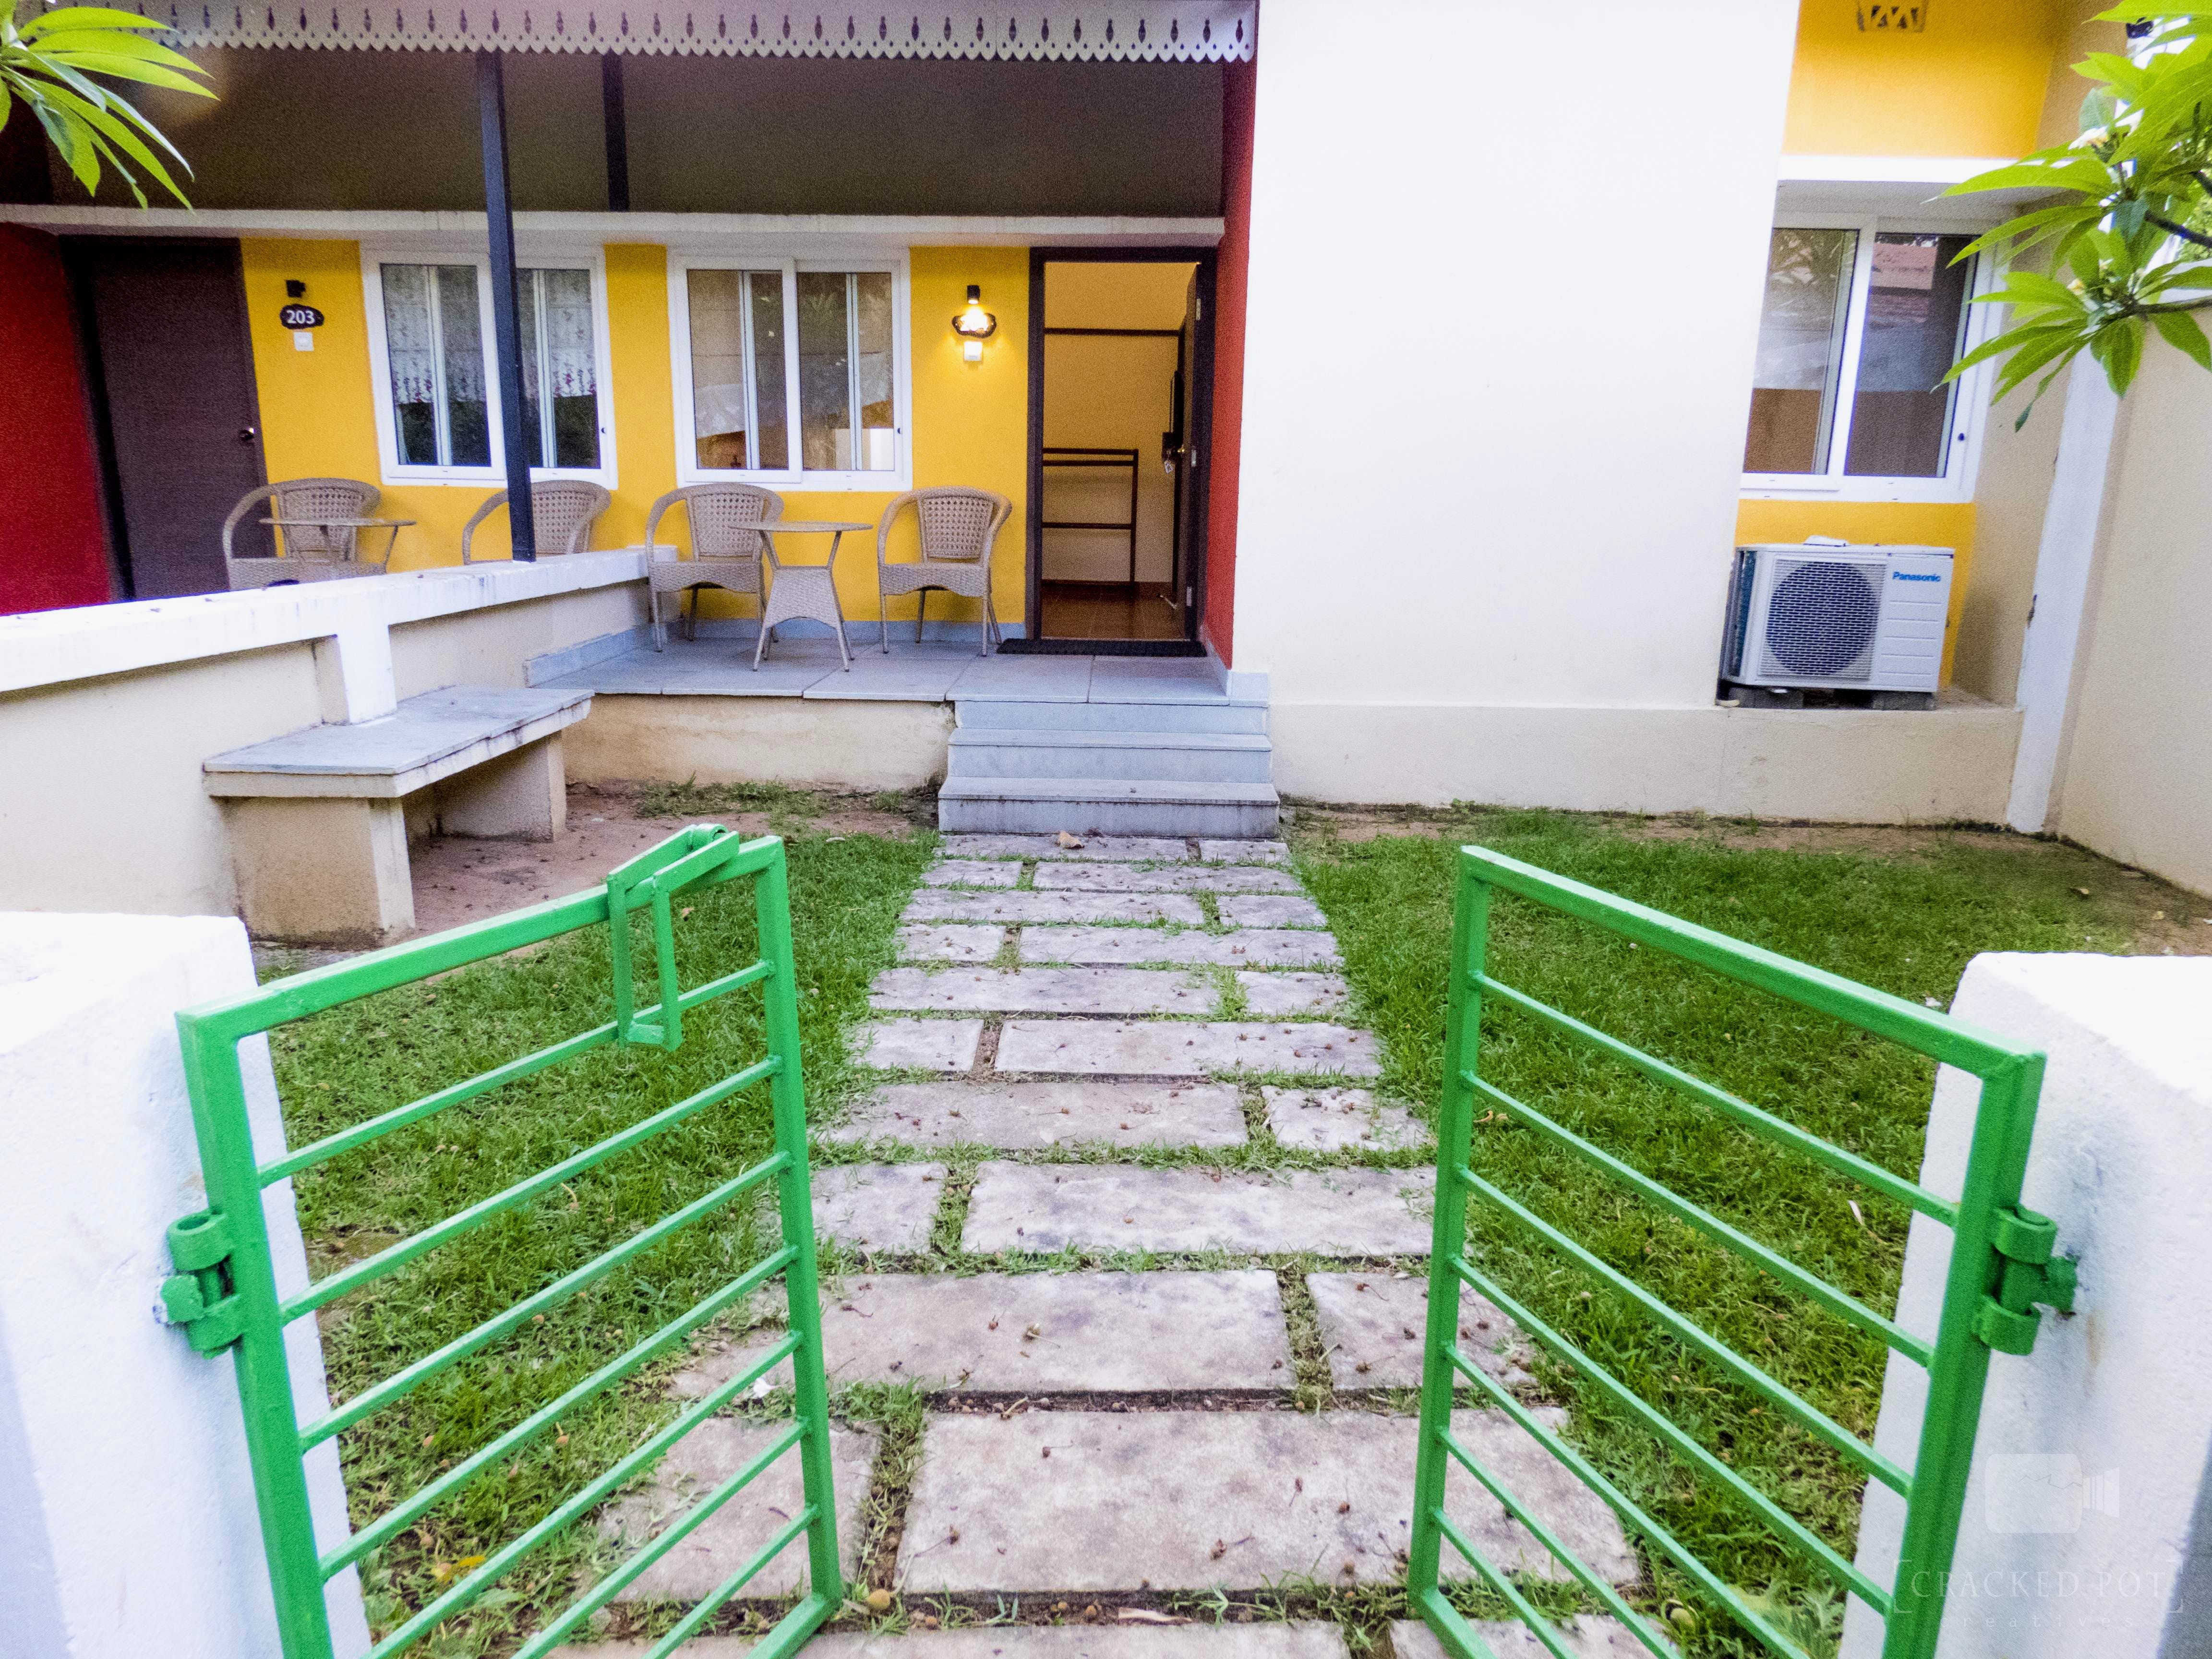 Property,Green,House,Real estate,Building,Home,Yellow,Stairs,Condominium,Room